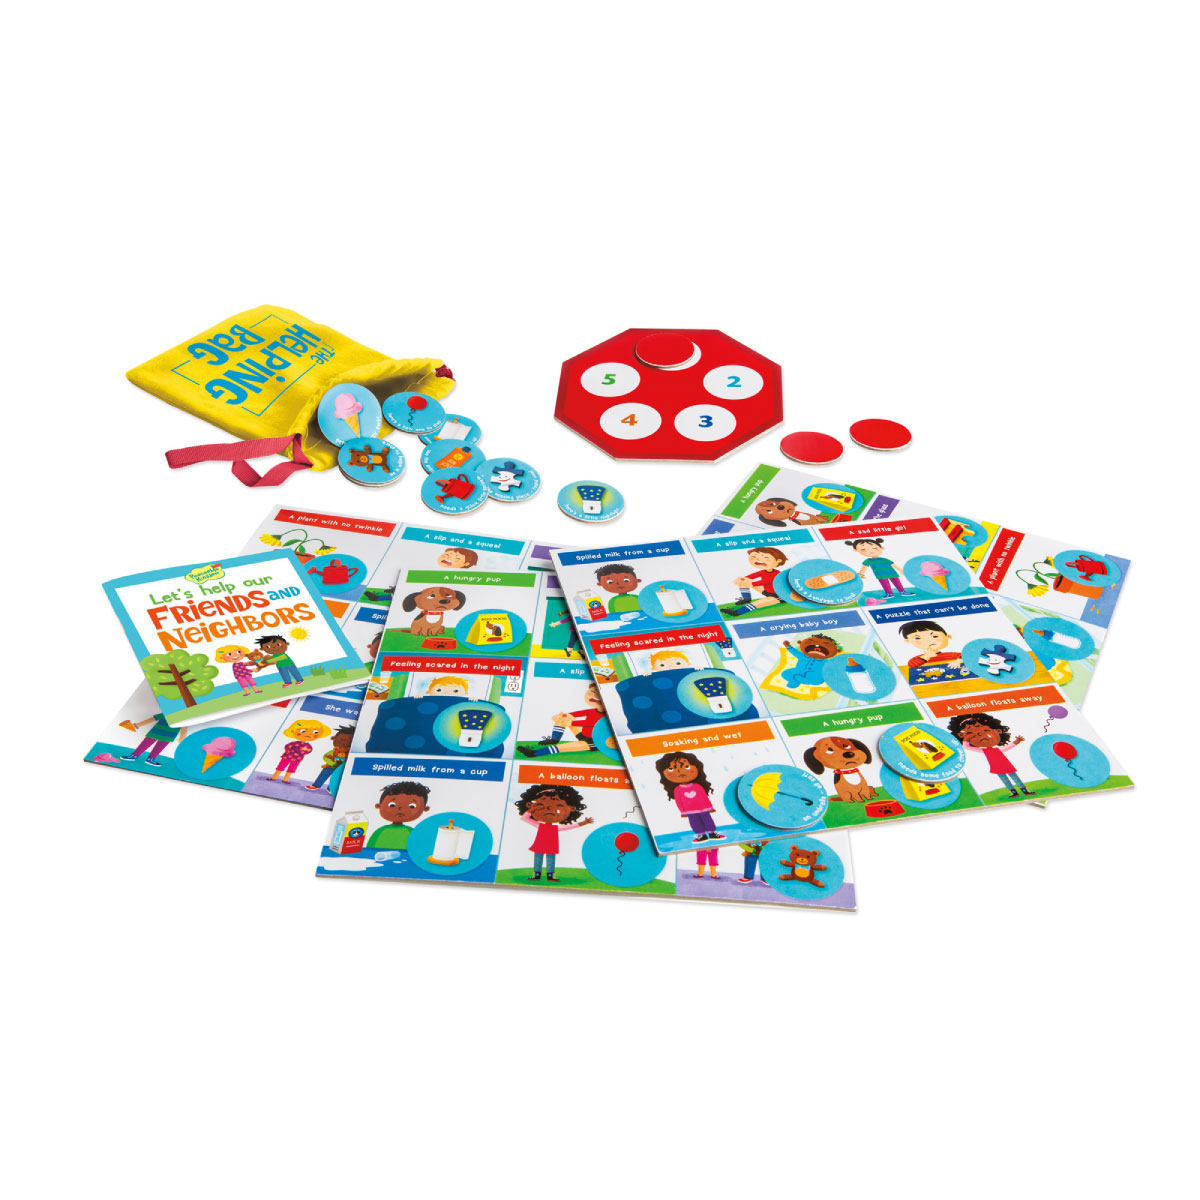 Peaceable Kingdom Friends & Neighbors Matching Game